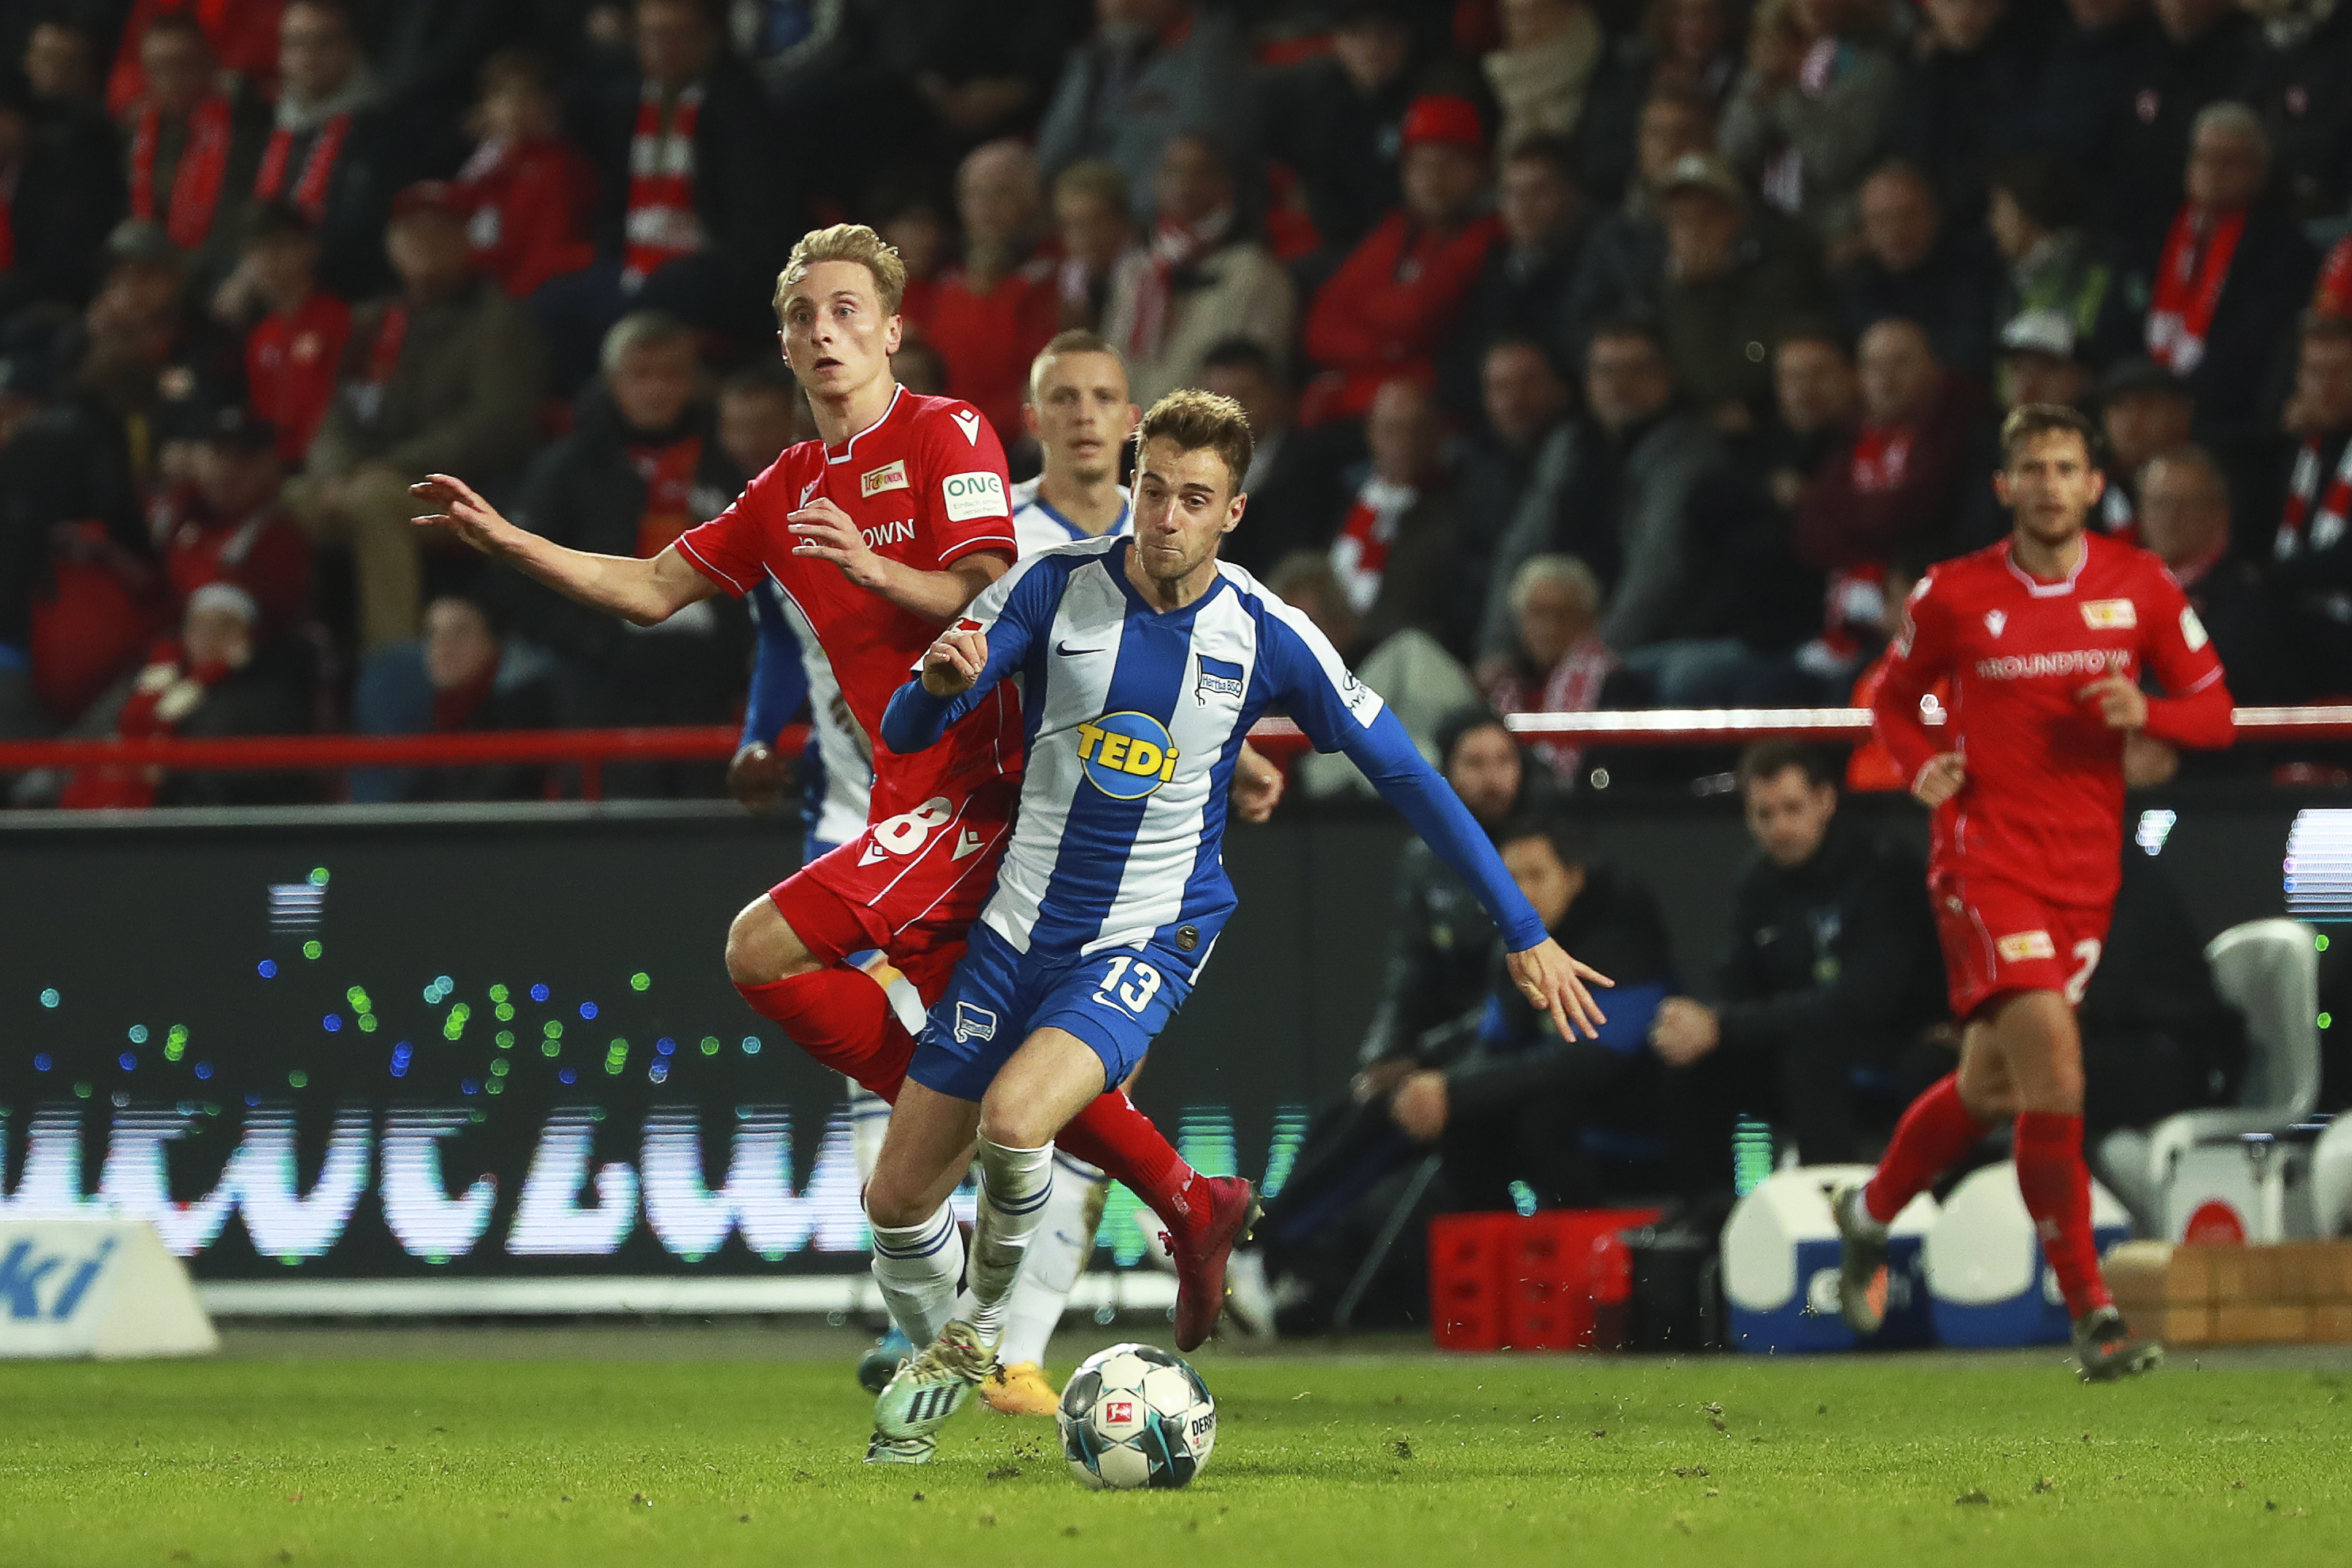 epa07967869 Union's Joshua Mees (L) and Hertha's Lukas Kluenter (C) in action during the German Bundesliga soccer match between FC Union Berlin and Hertha BSC in Berlin, Germany, 02 November 2019.  EPA/HAYOUNG JEON CONDITIONS - ATTENTION: The DFL regulations prohibit any use of photographs as image sequences and/or quasi-video.